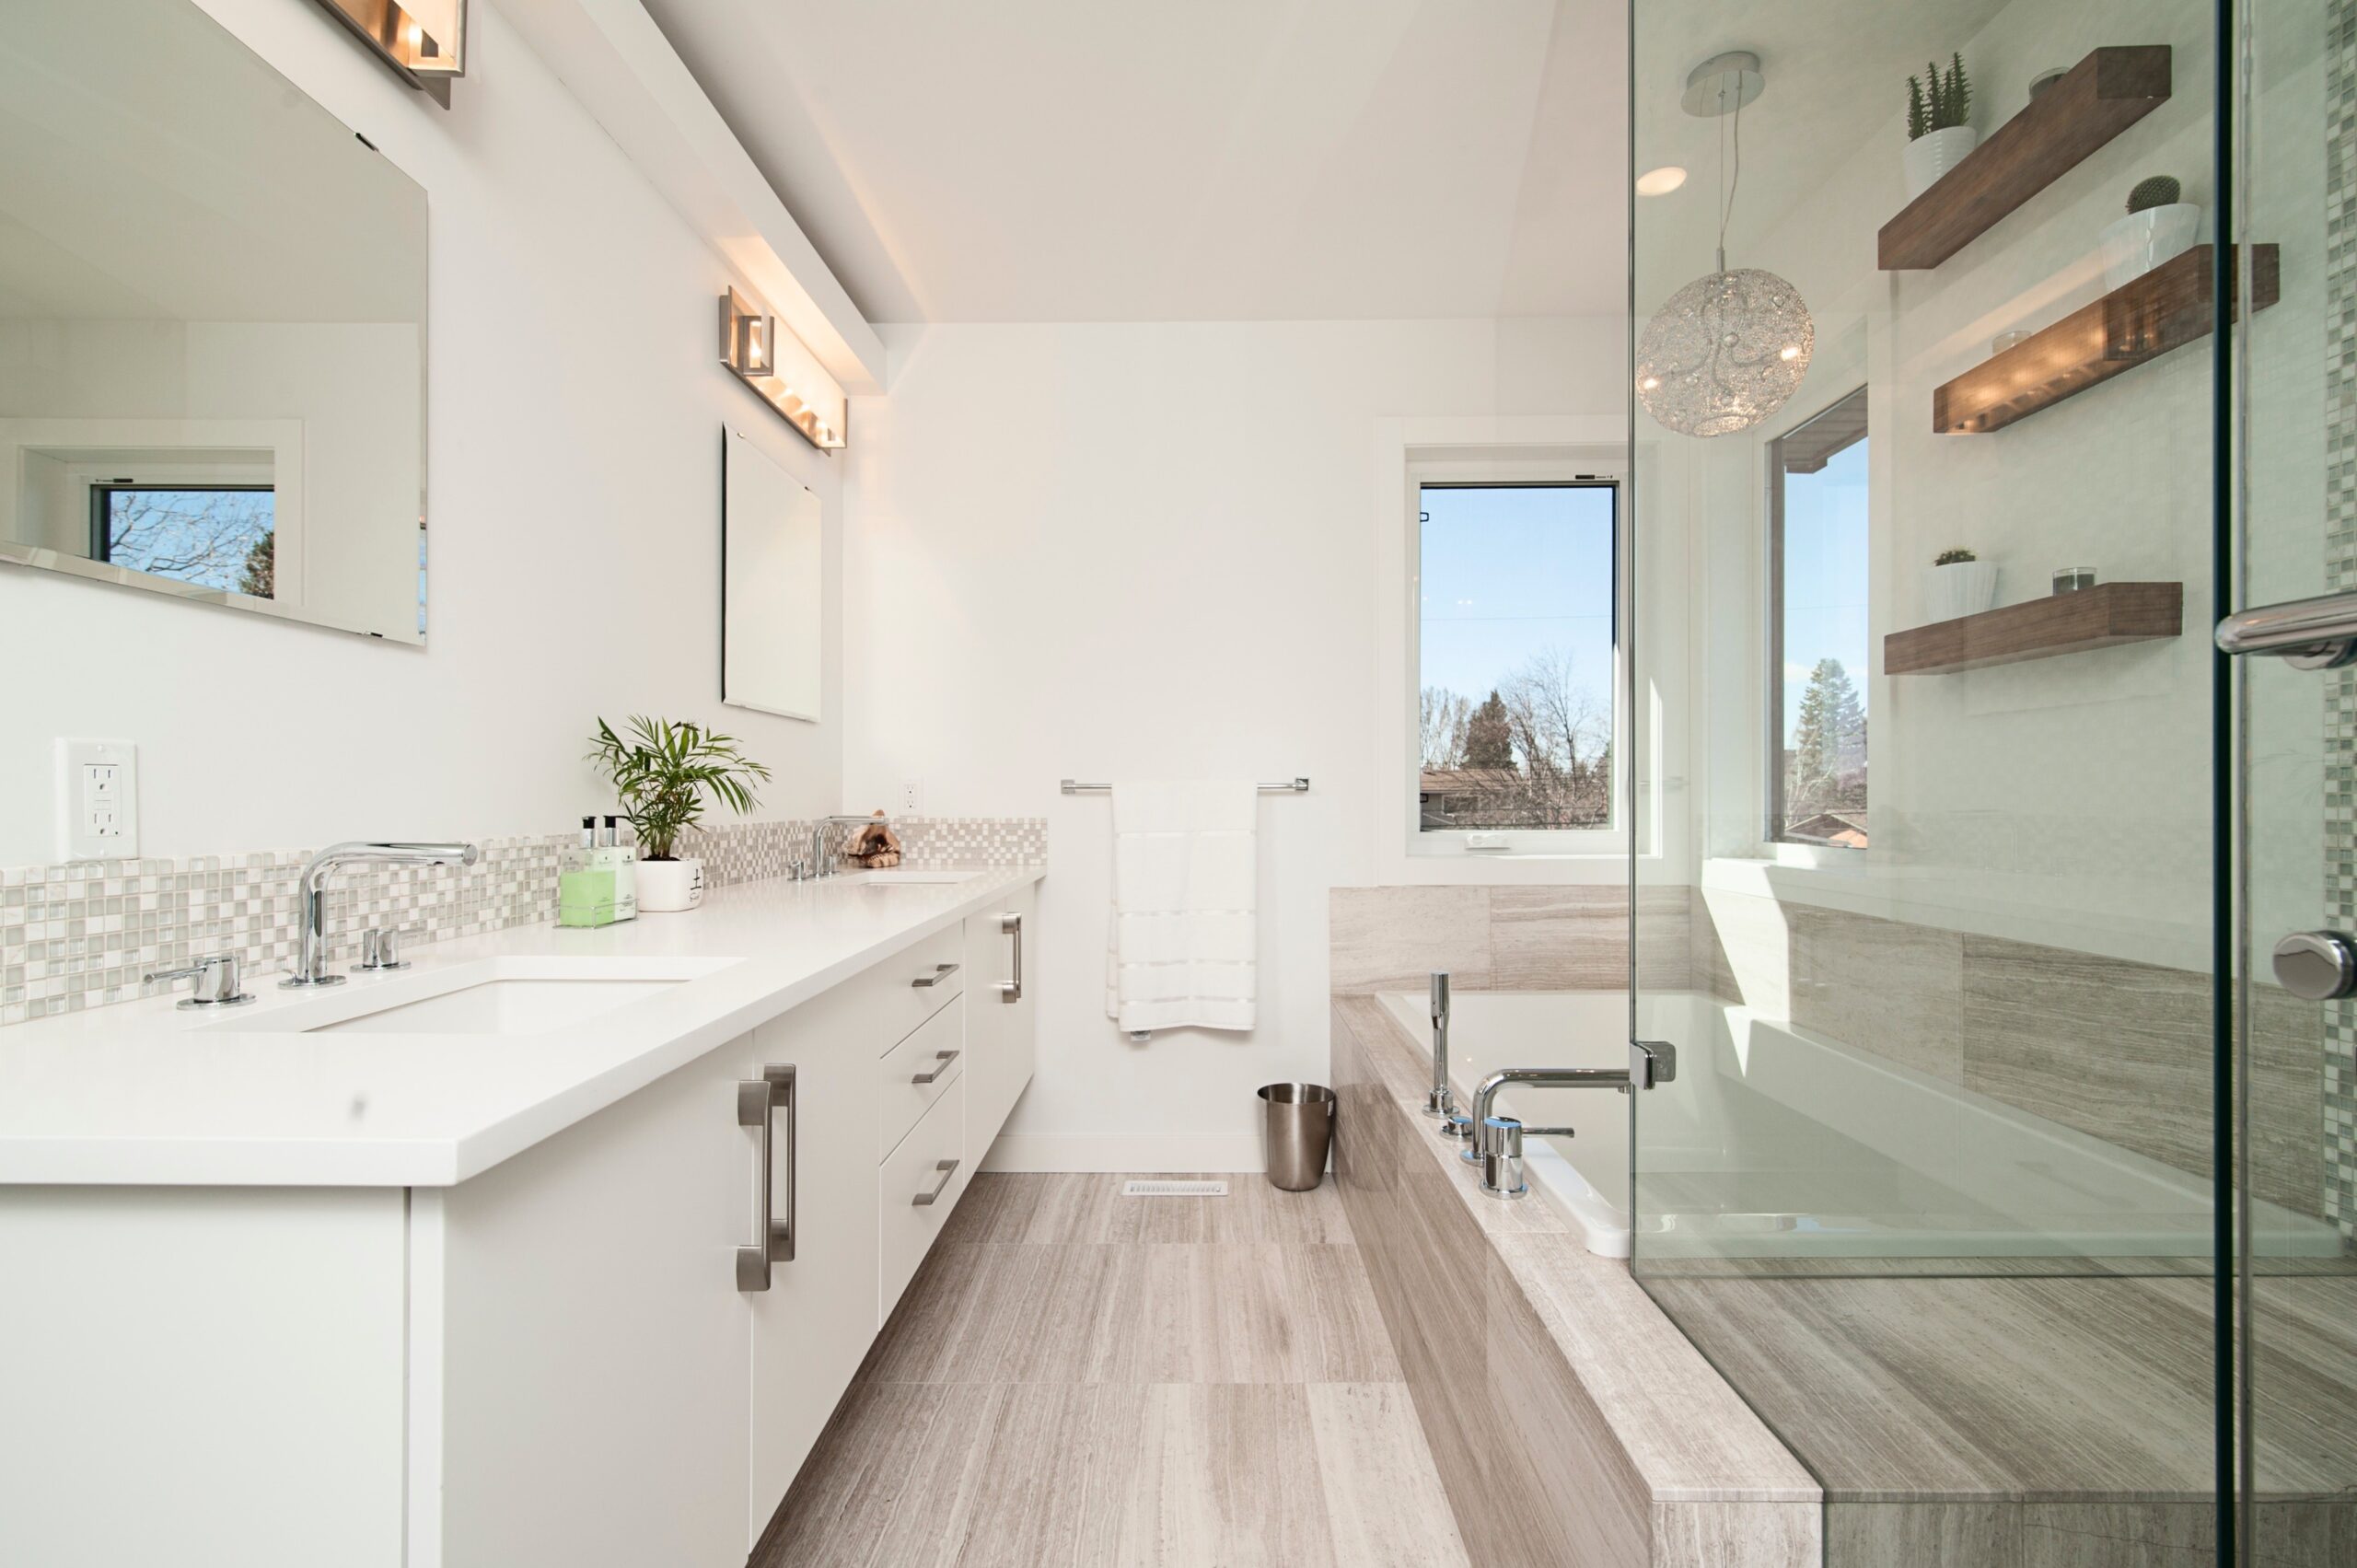 7 Best Tips to Keep Your bathroom Fresh All Day 